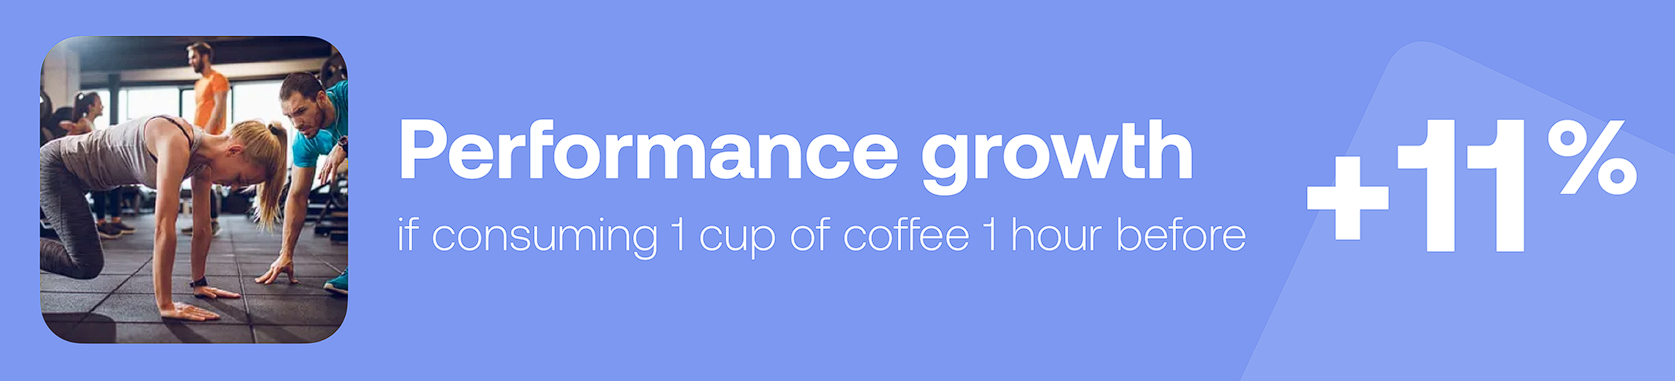 Perfomance growth if consuming 1 cup of coffee 1 hour before +11%